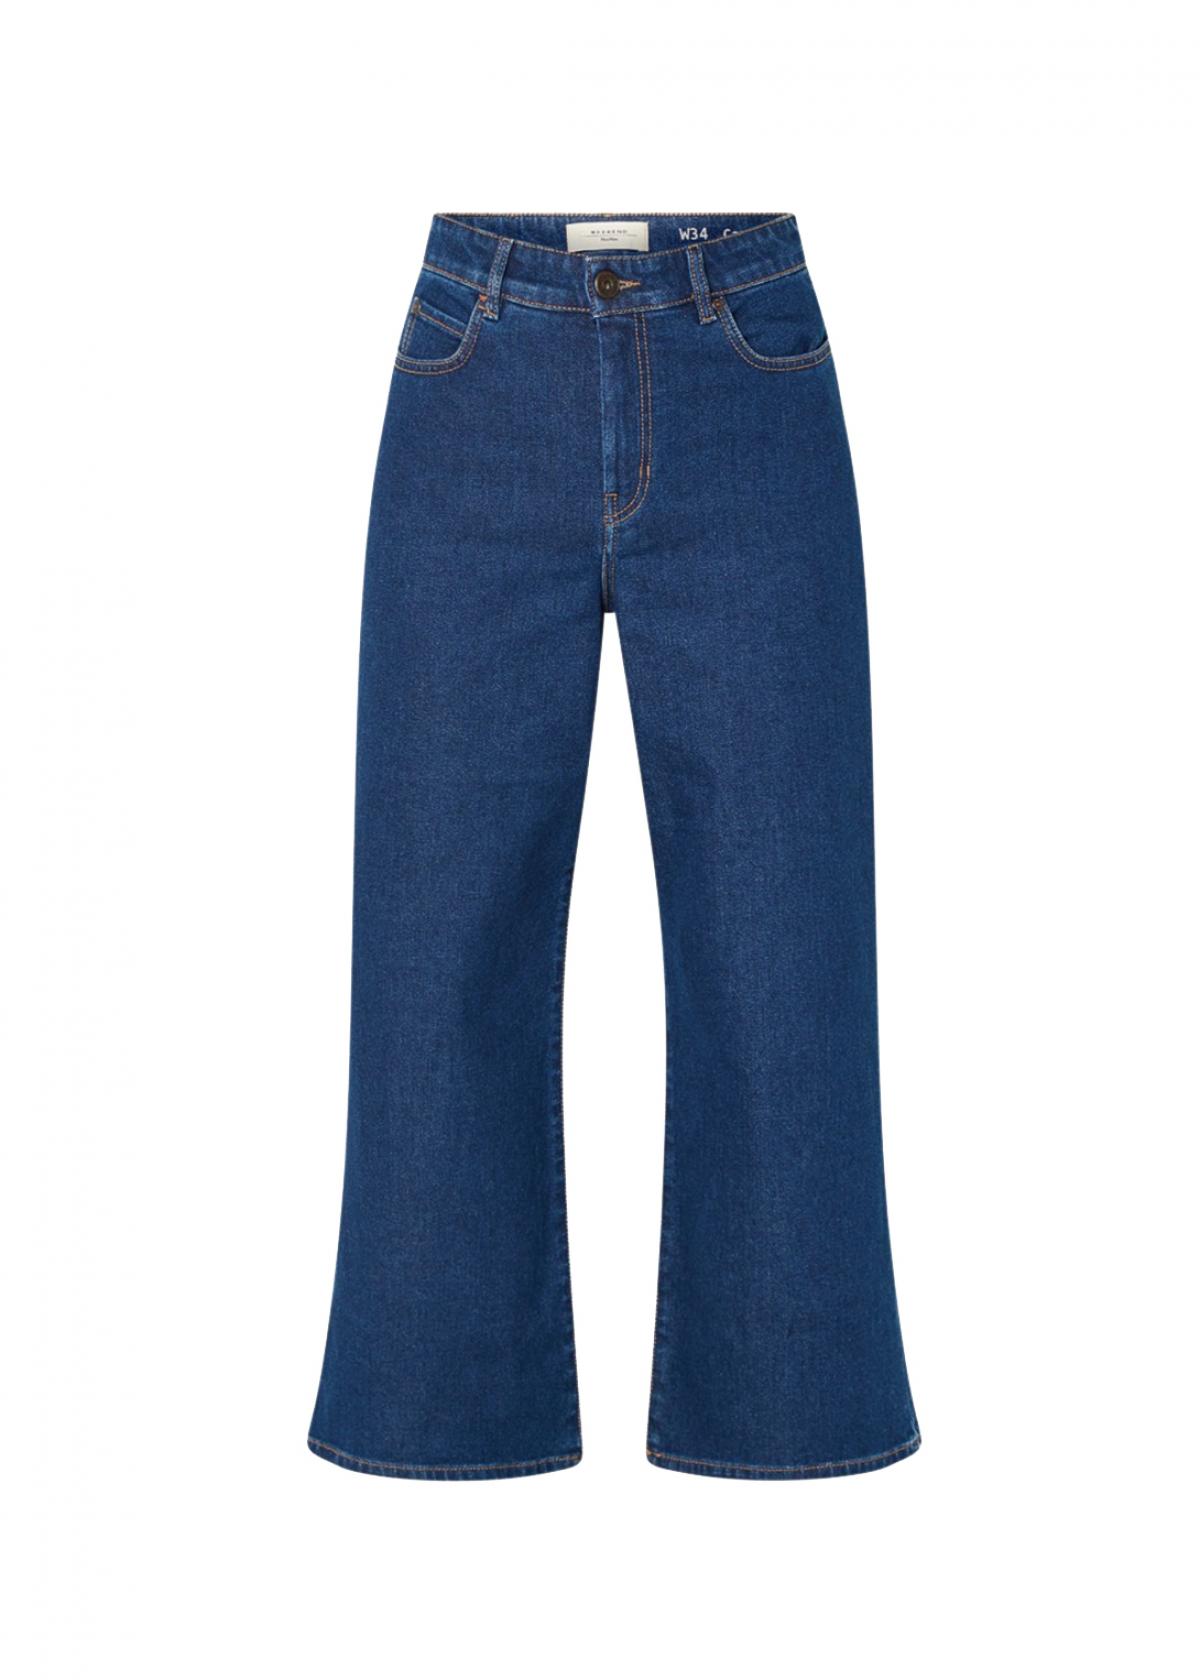 Cropped, uitlopende jeans